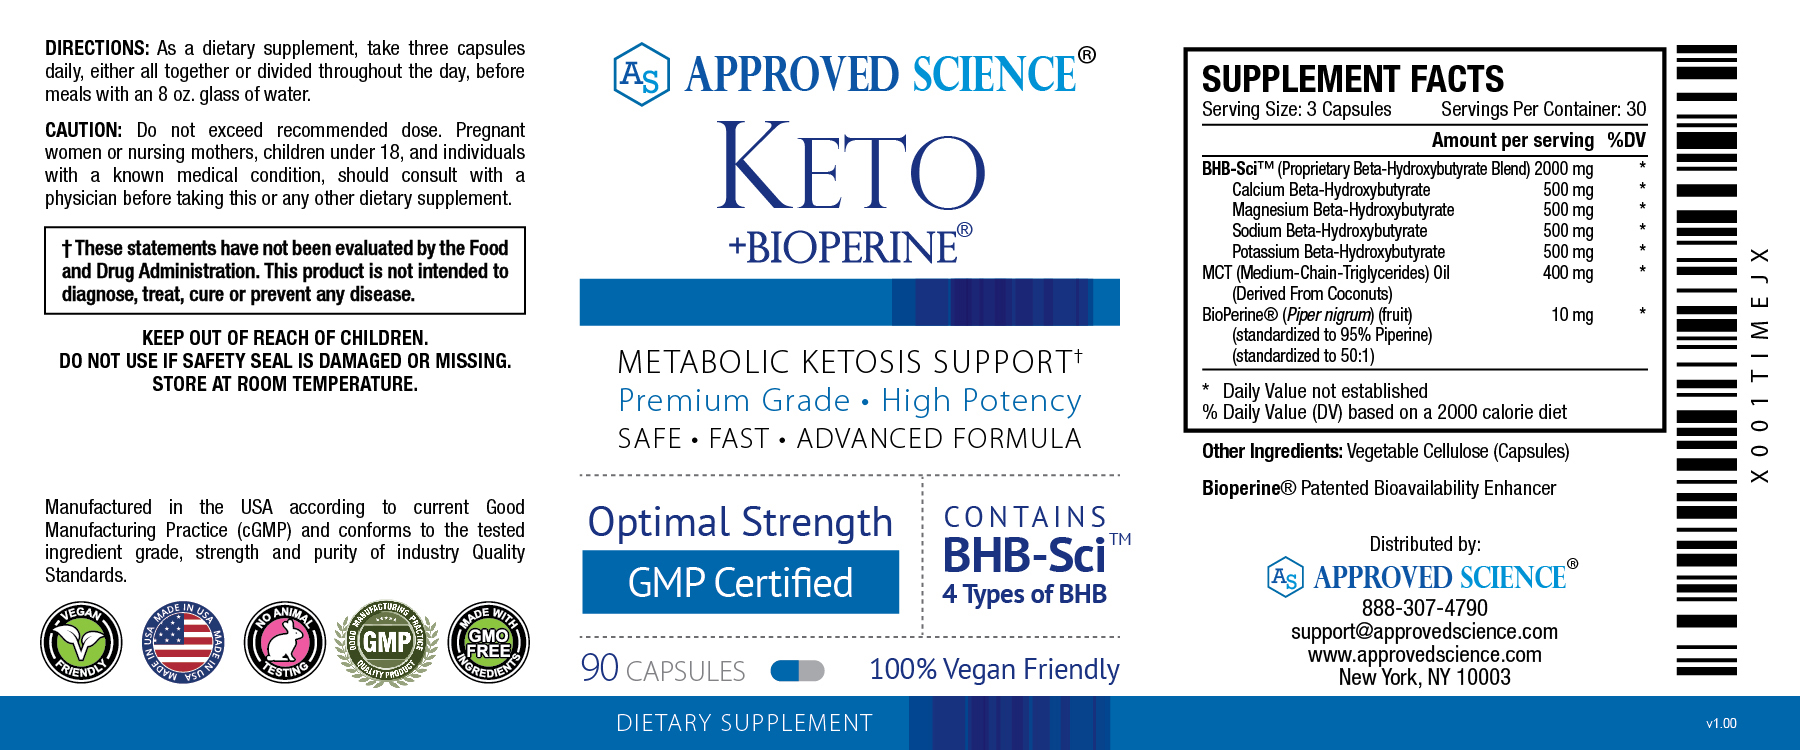 is the keto diet backed by science